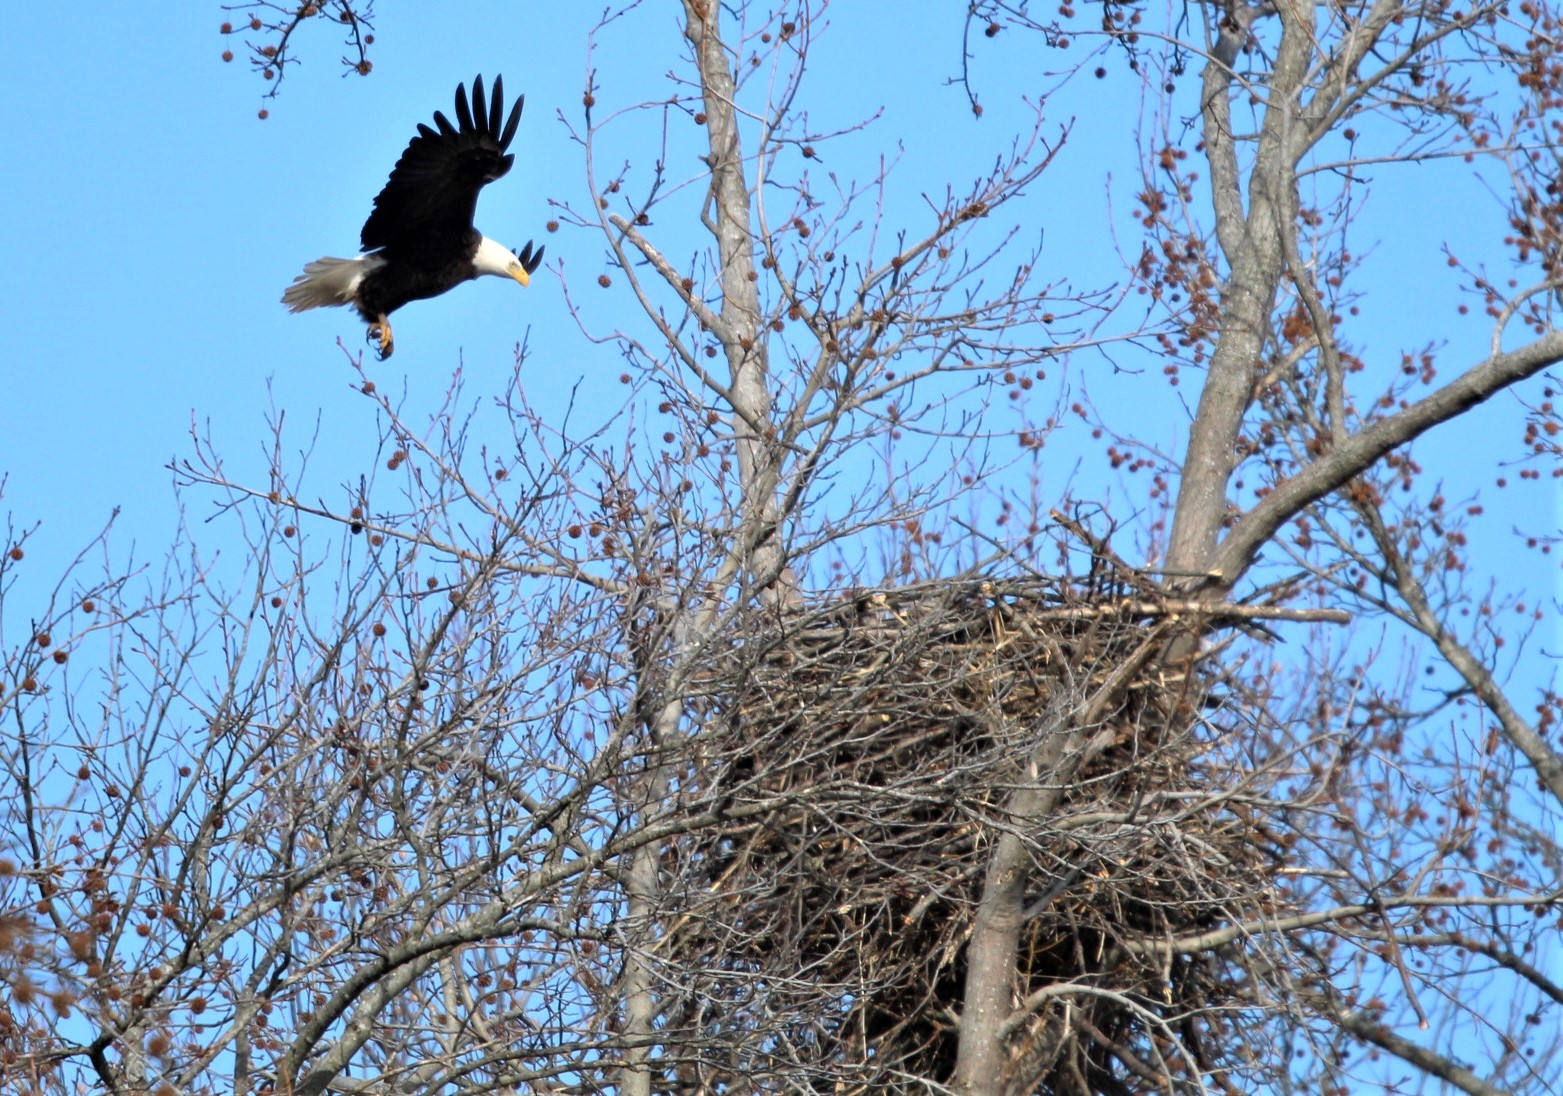 A bald eagle flies to its nest in a tree.